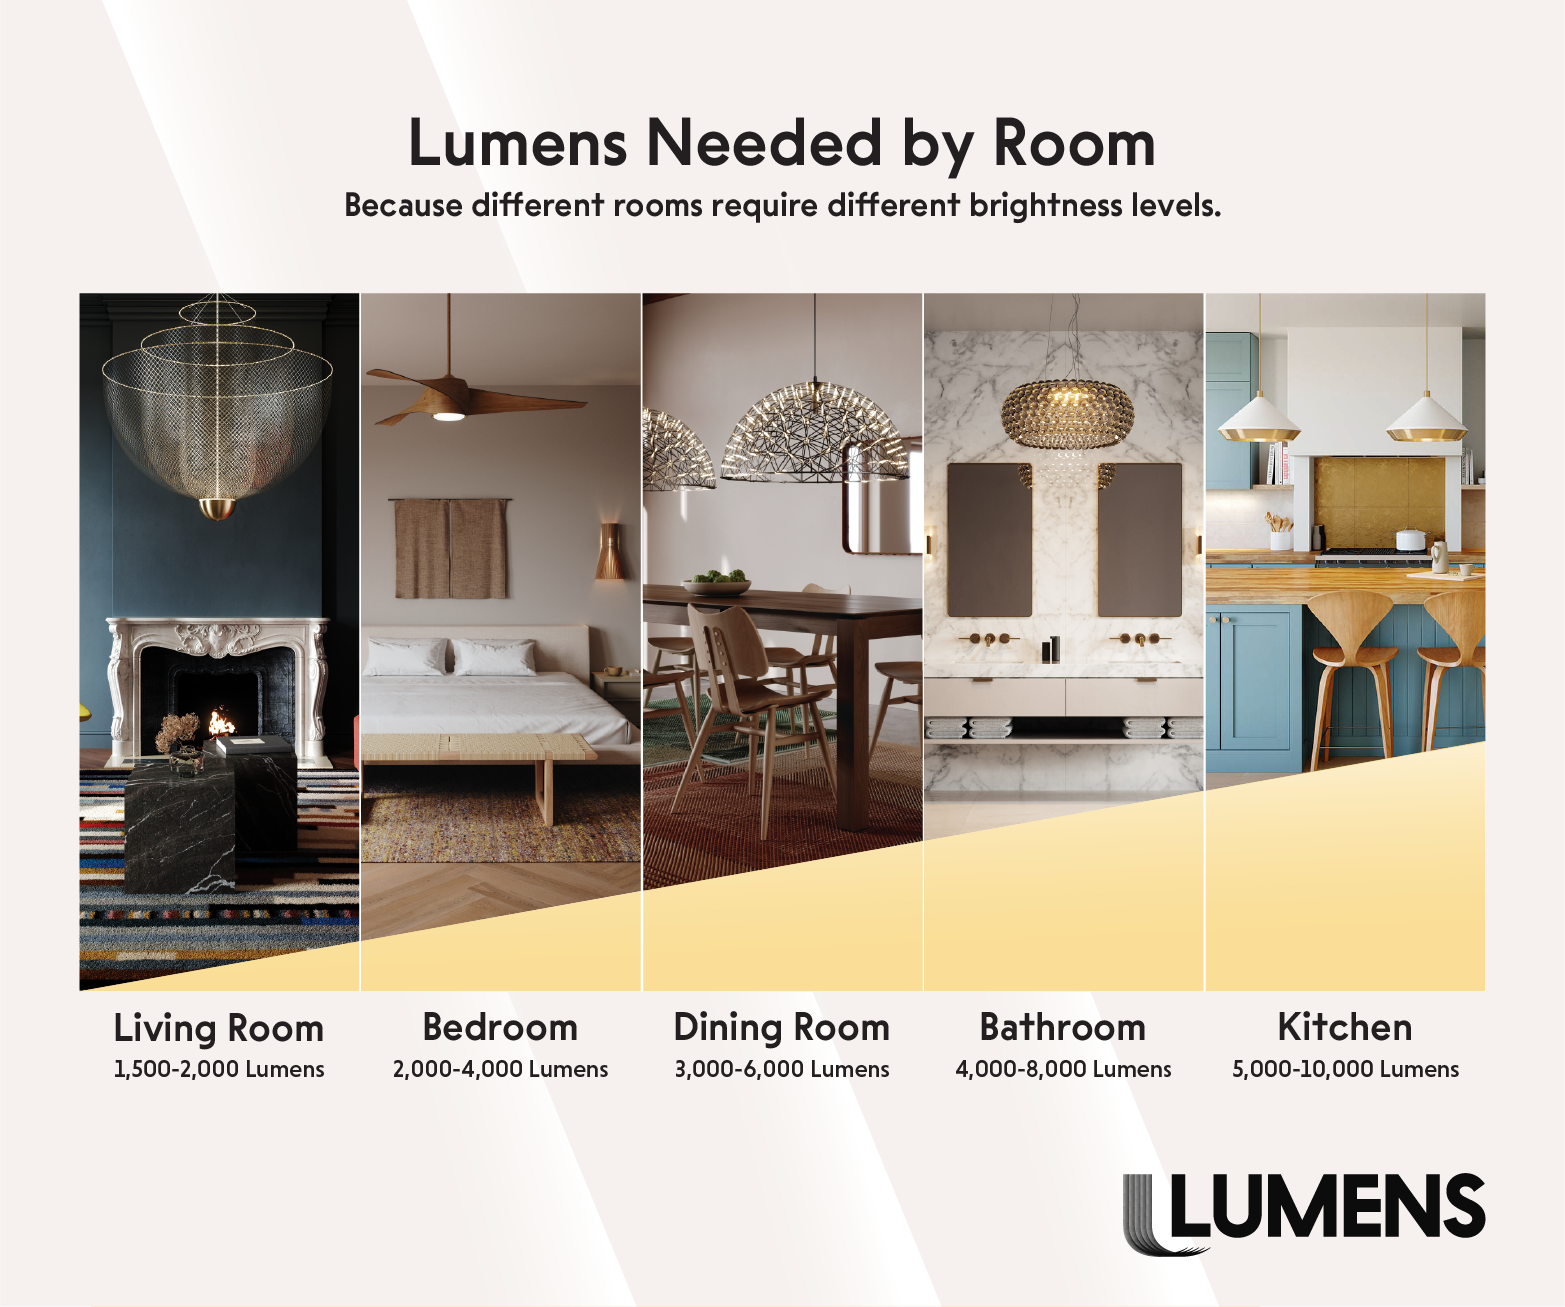 Lumens Needed by Room